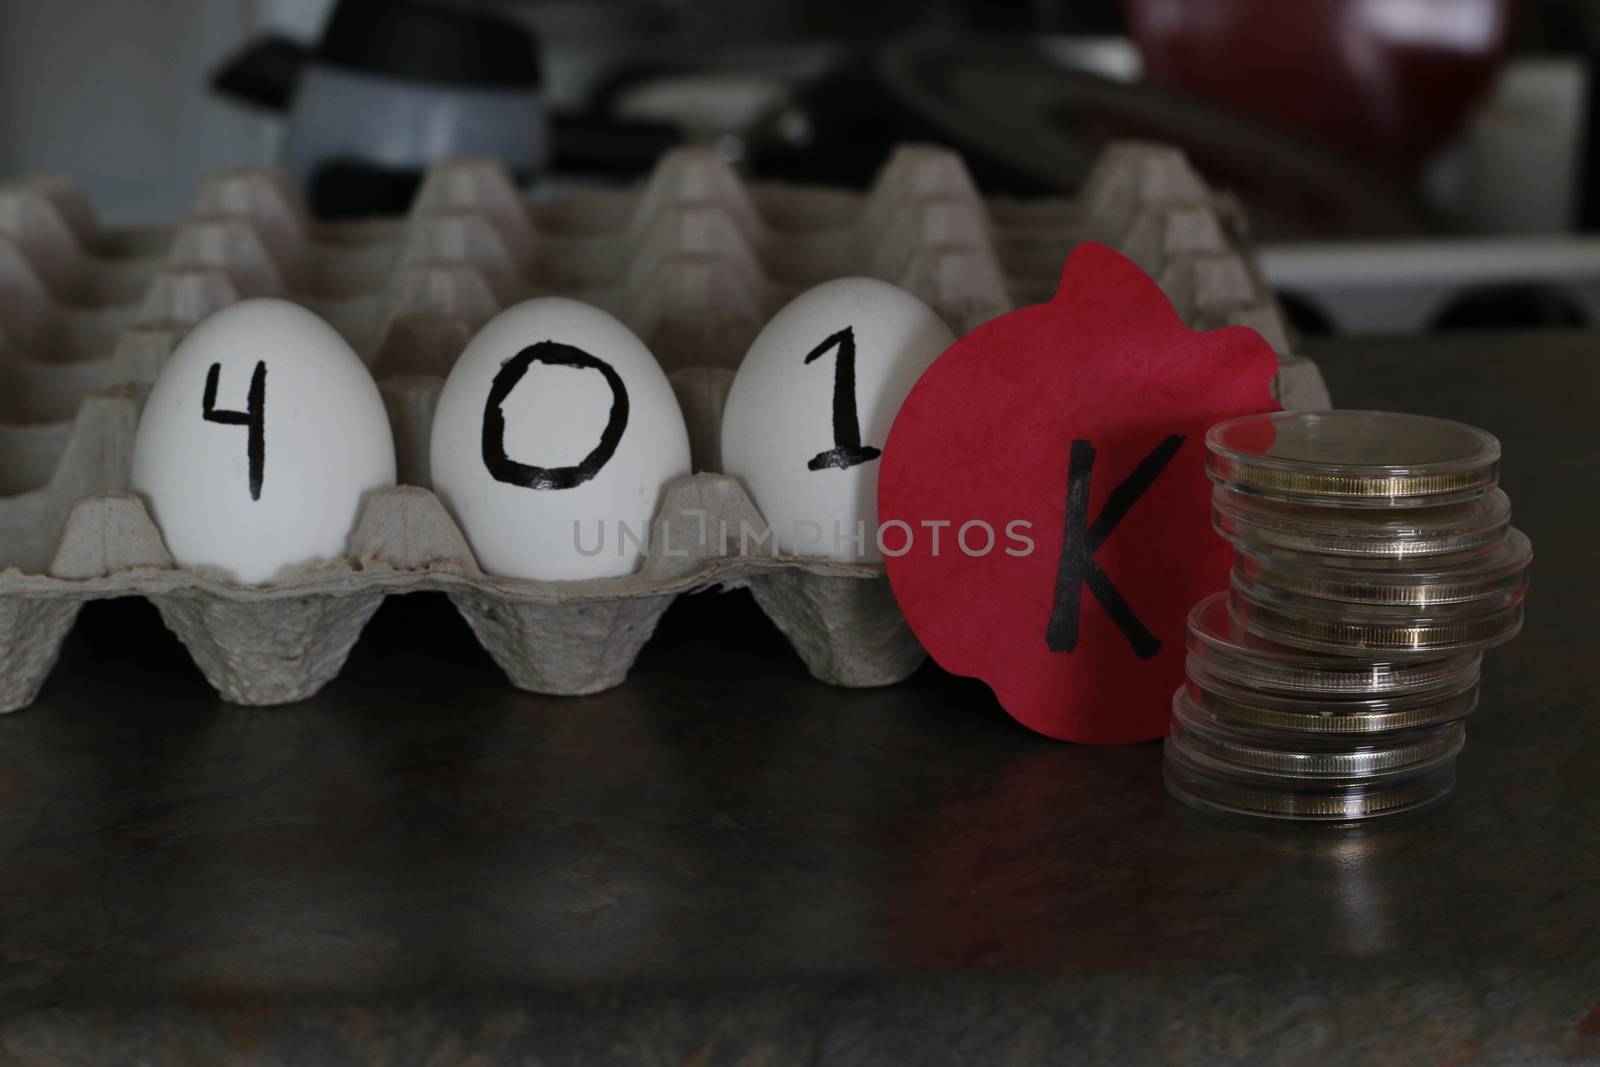 The word 401k wrote on eggs. Theme of nest egg for retirement.